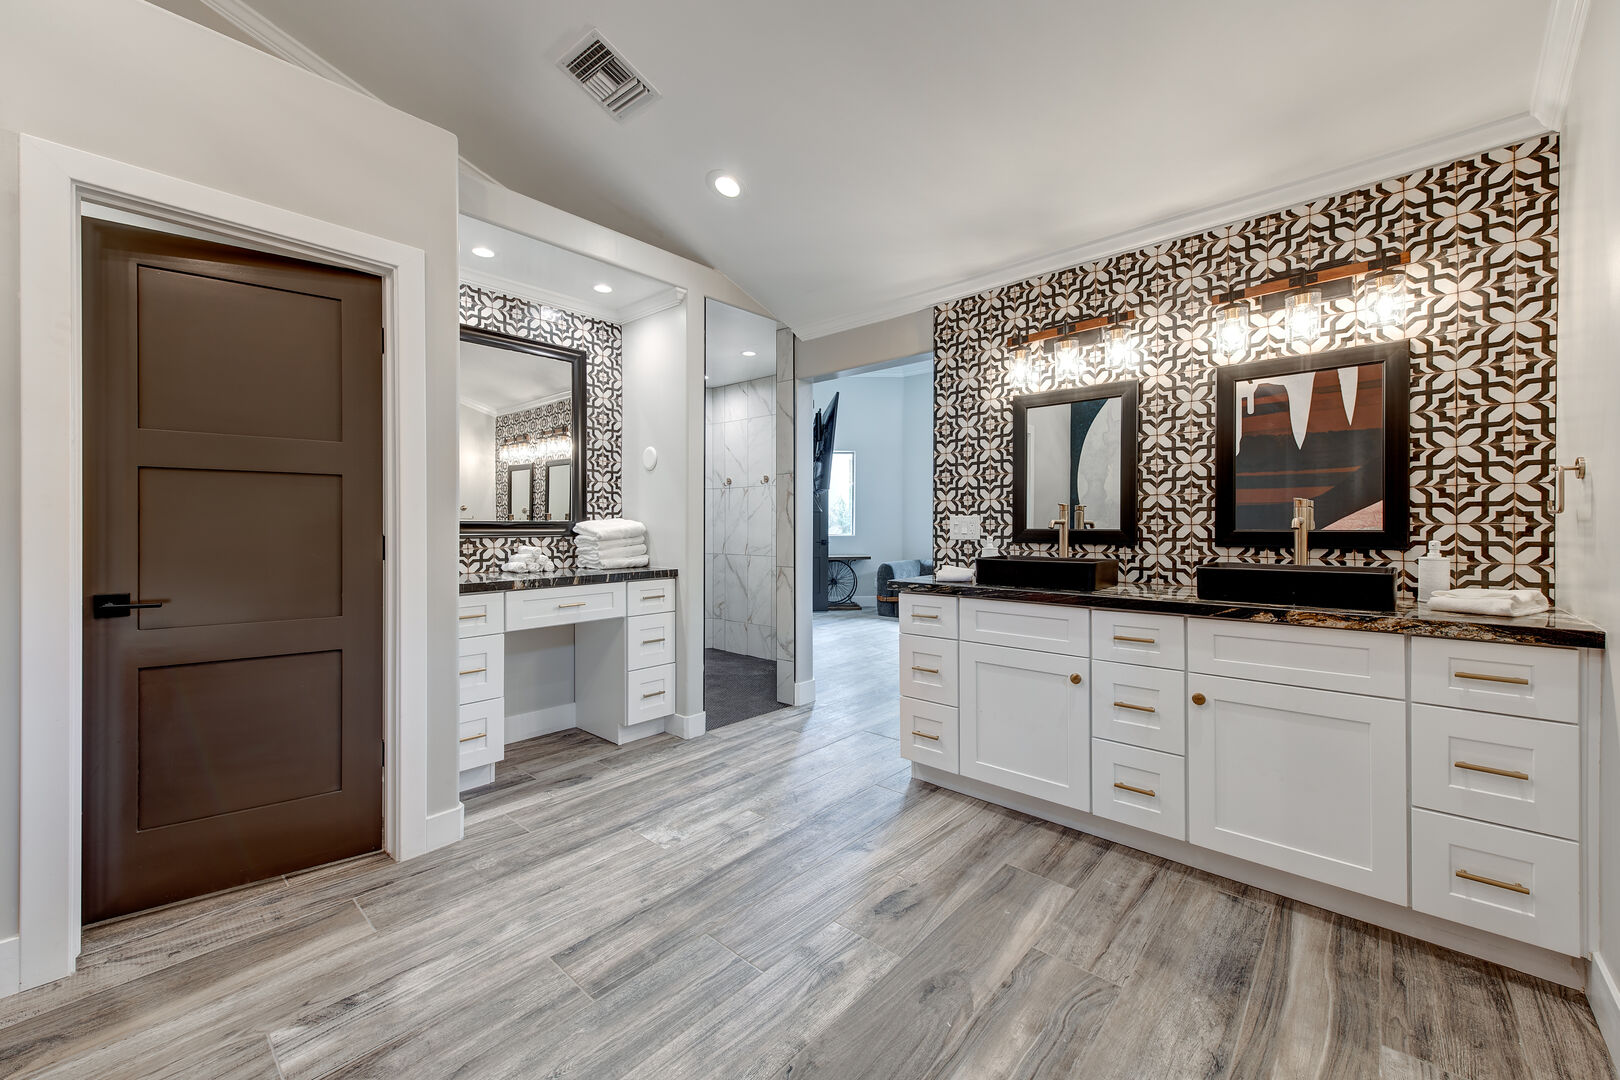 Master Bathroom with large walk-in closet with walk in shower, soaker tub, dual vanity and makeup counter.